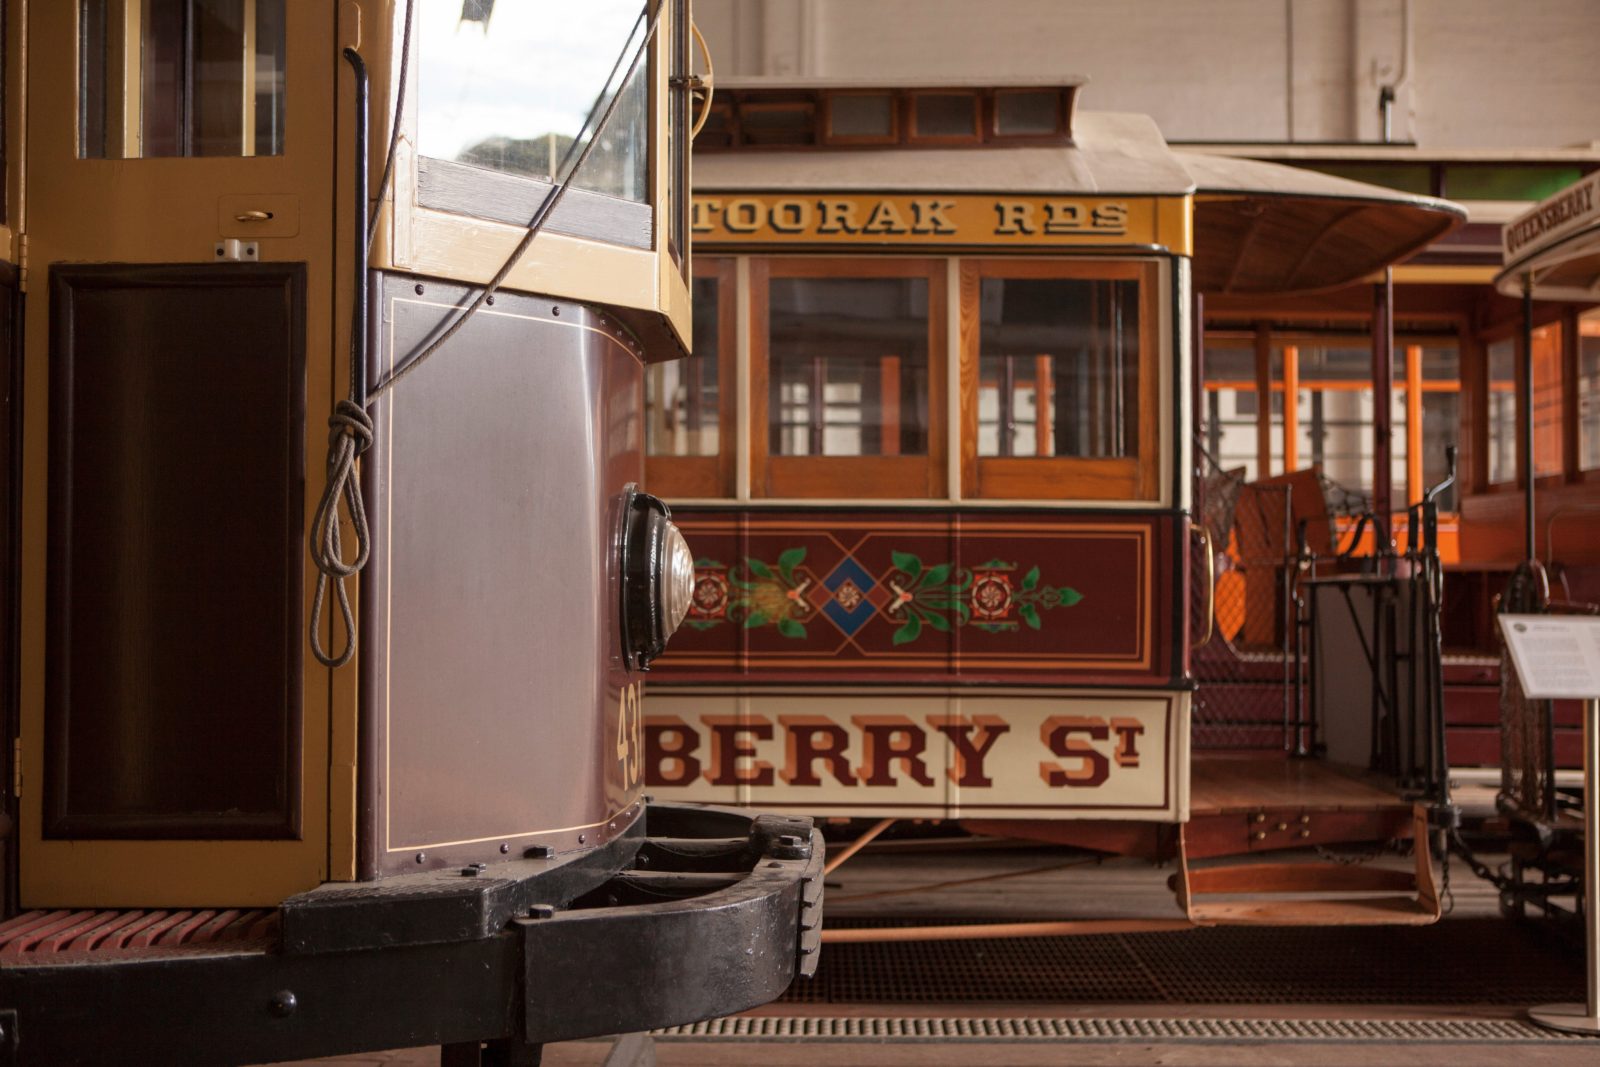 Heritage trams at the Melbourne Tram Museum